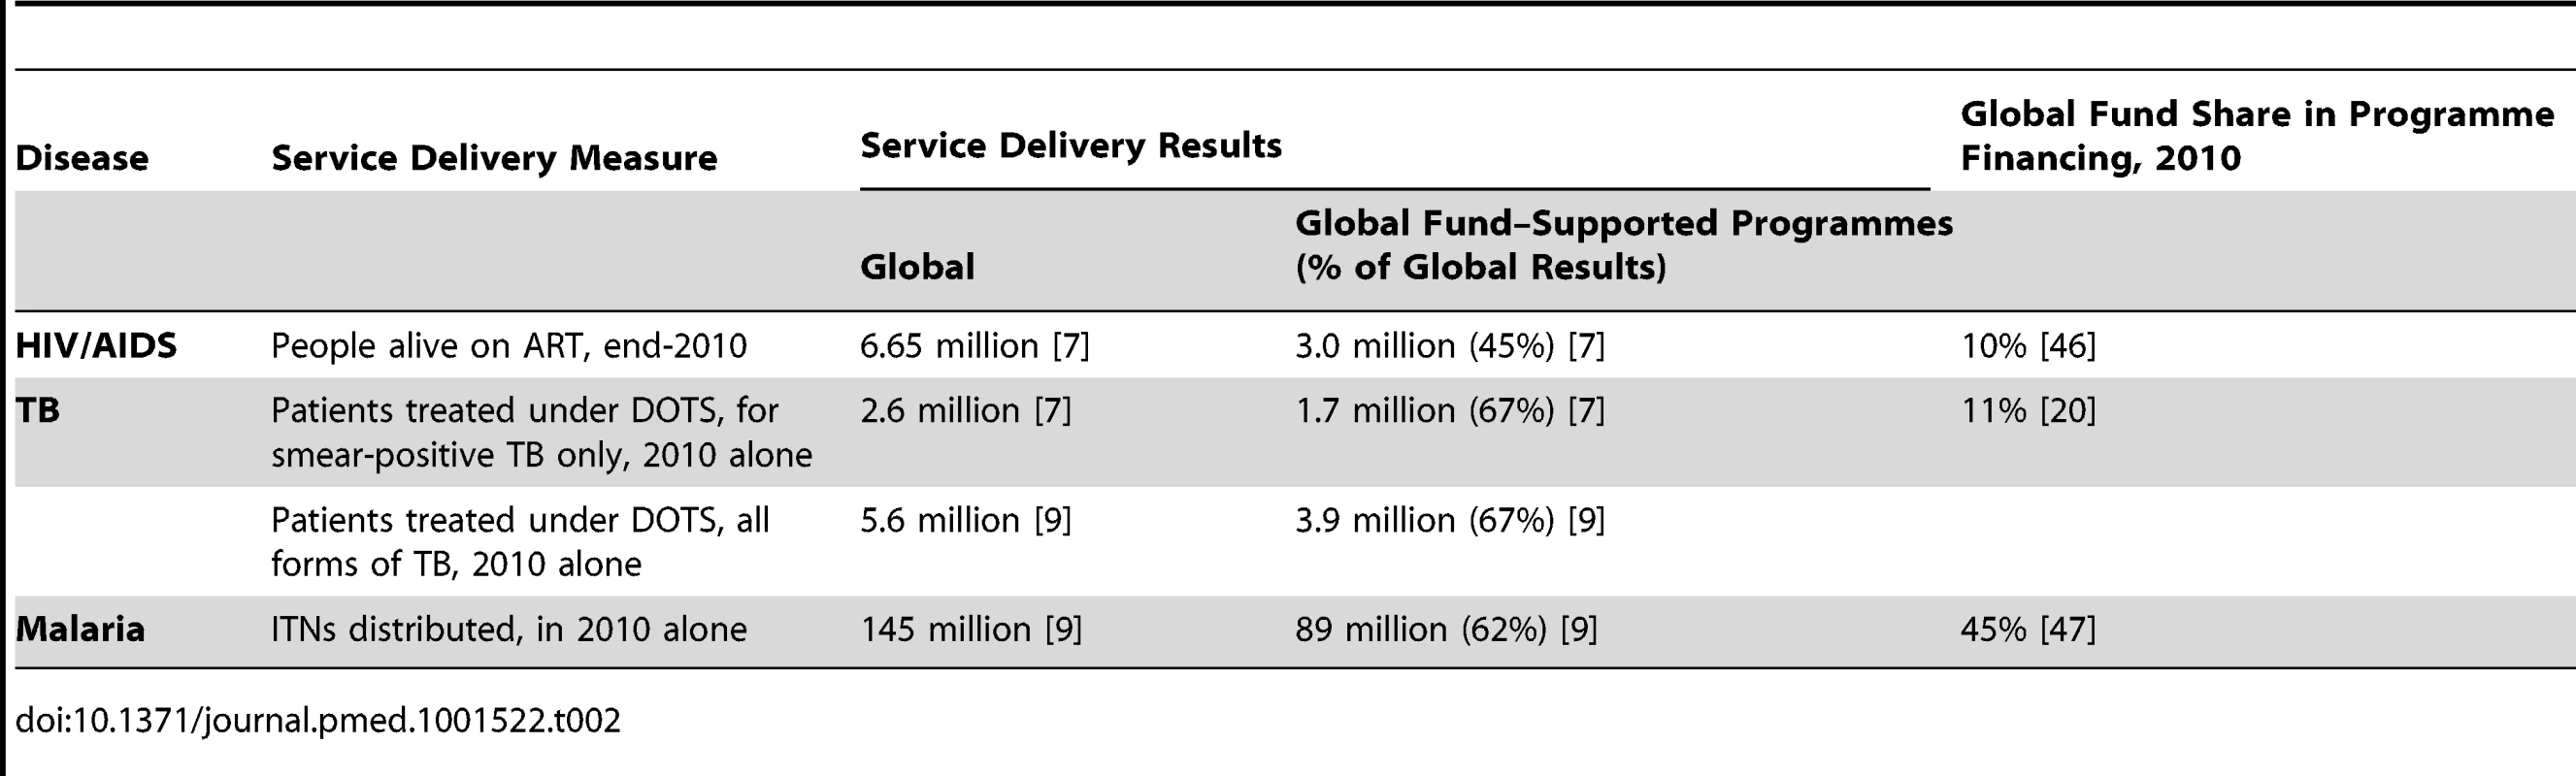 Global Fund's share in service delivery results and programme financing, low- and middle-income countries.